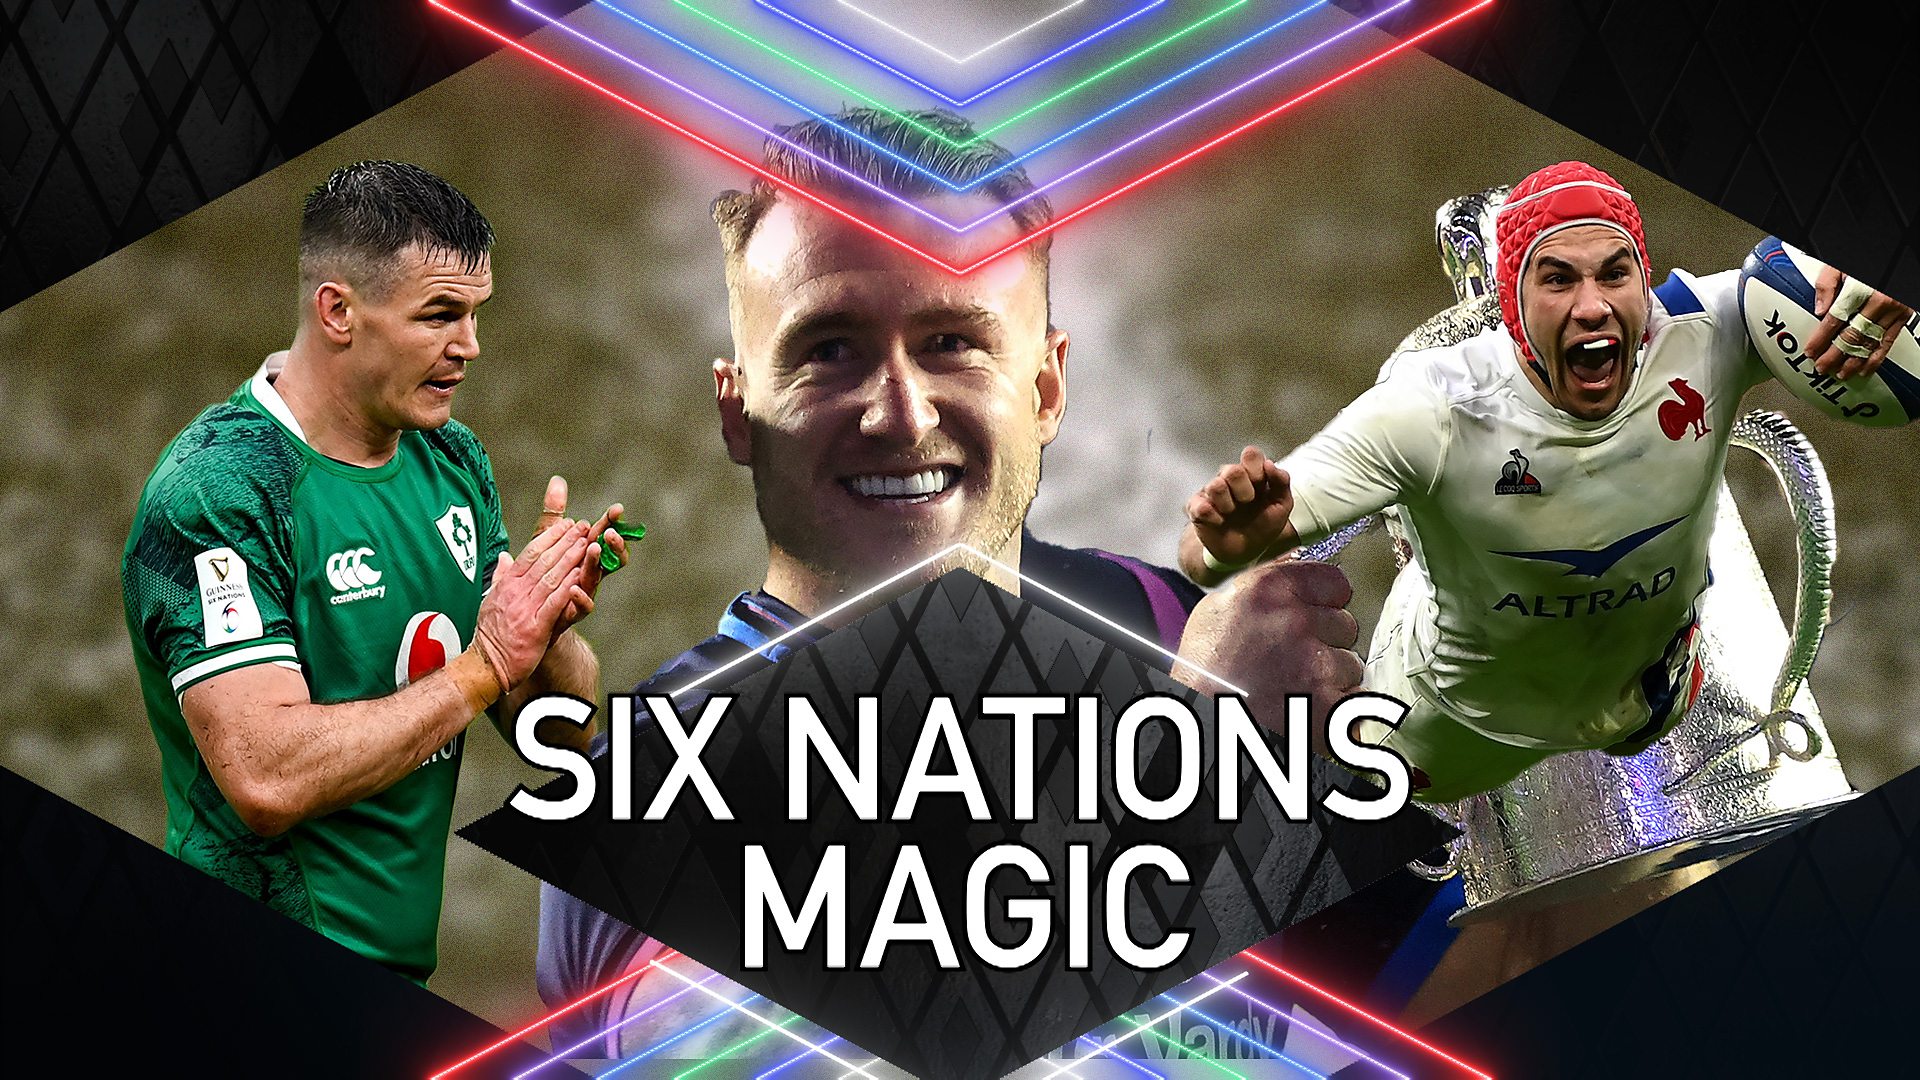 Six Nations 2022 Relive the incredible drama, great tries and big hits from round one